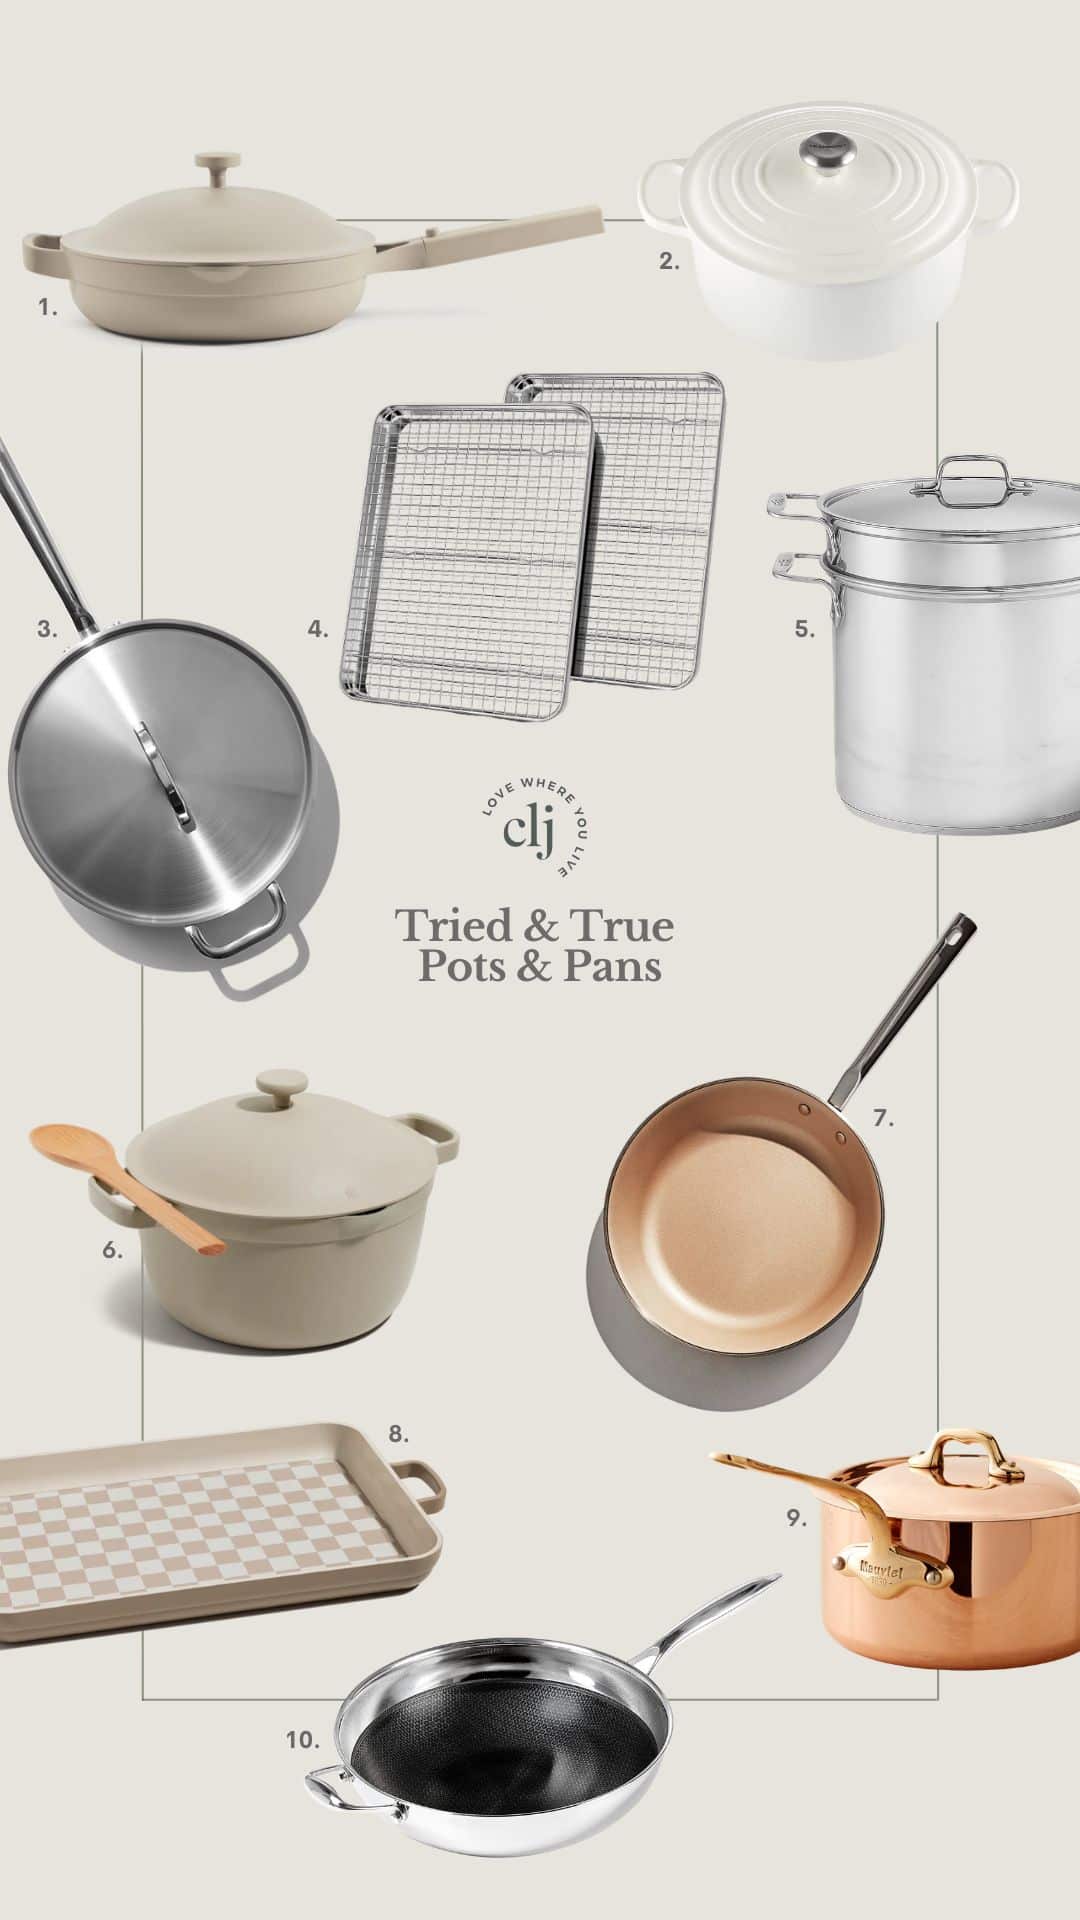 Non-toxic Cookware - Best Cookware Set For 2-4 people